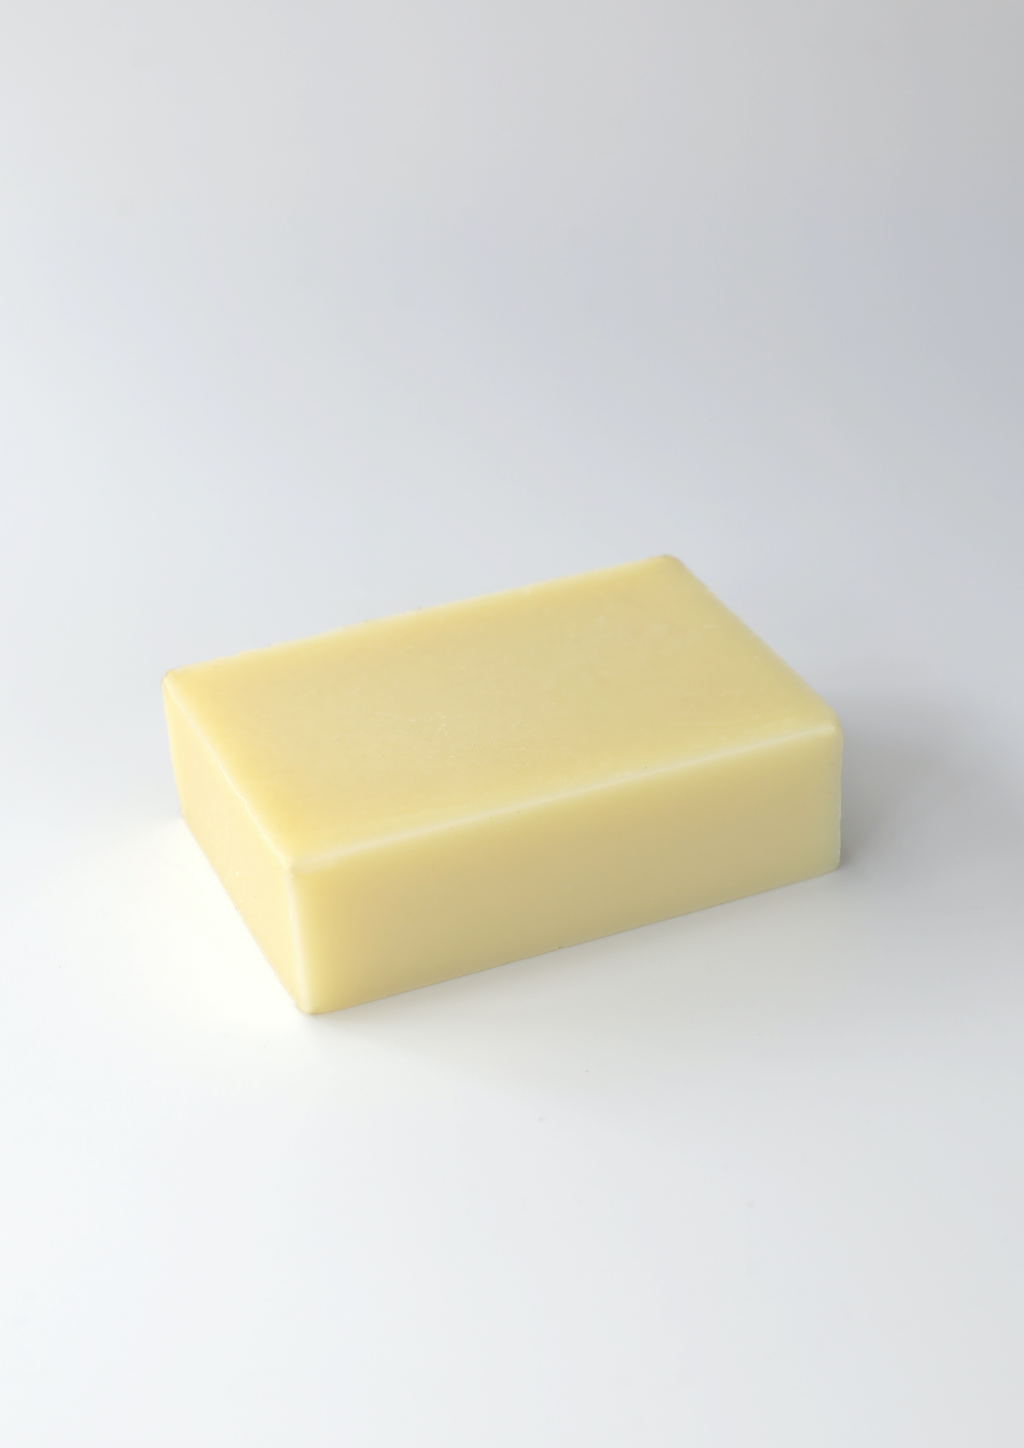 A single bar of pale yellow soap centered on a clean, white background.